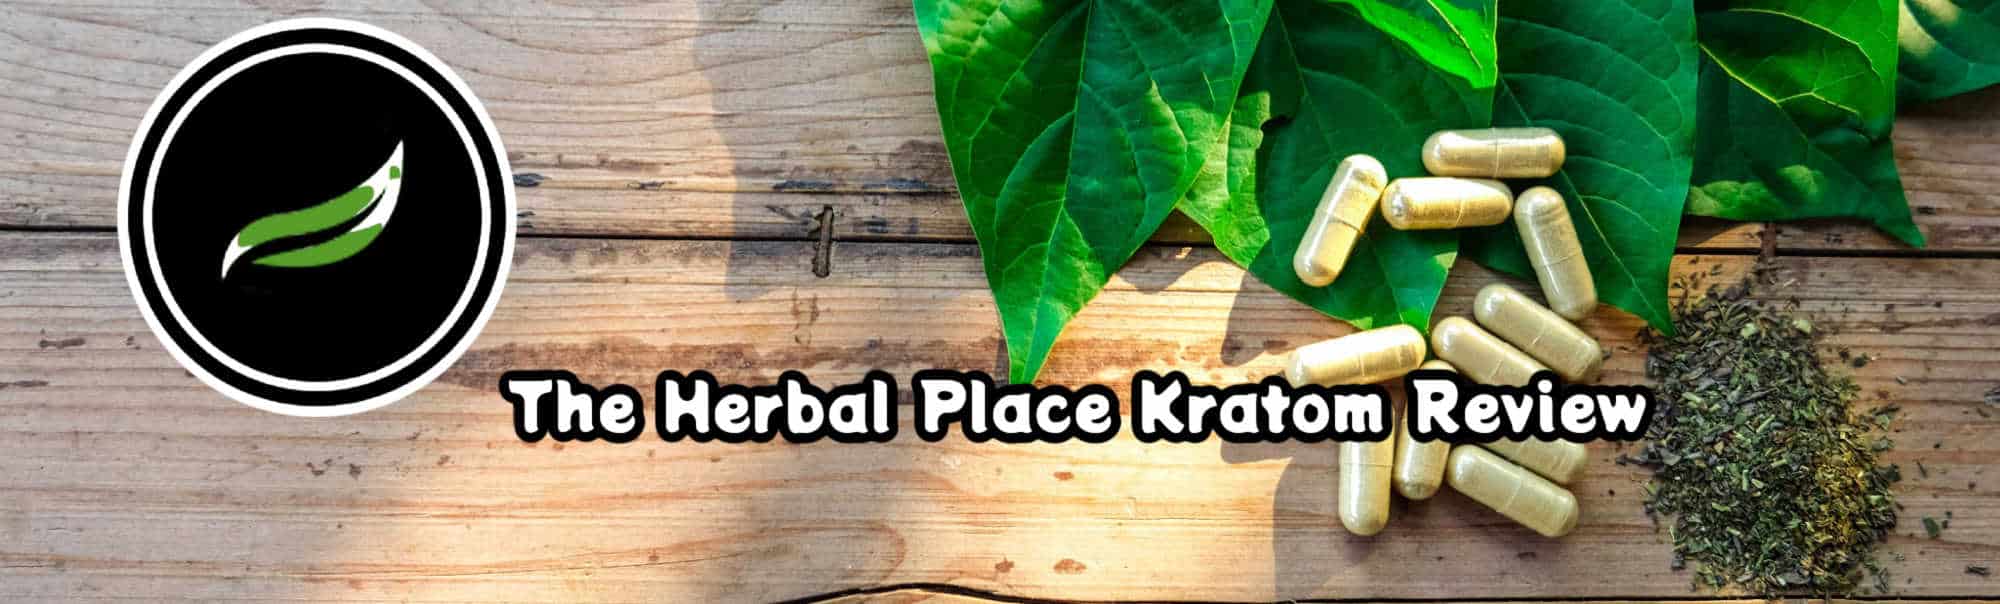 image of the herbal place kratom review